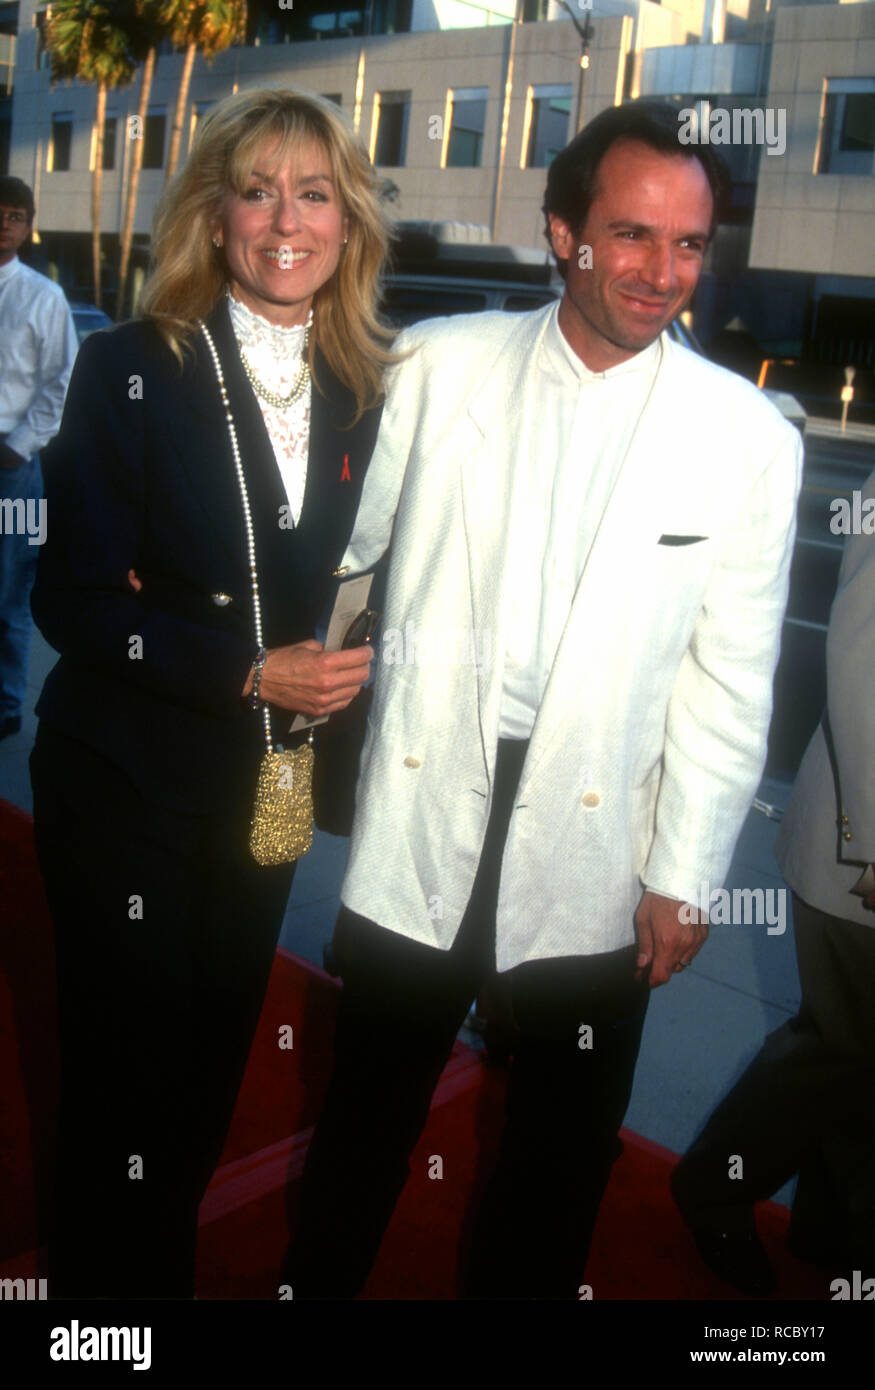 BEVERLY HILLS, CA - AUGUST 31: Actress Judith Light and husband actor Robert Desiderio attend HBO's 'And The Band Played On' screening on August 31, 1993 at the Academy Theater in Beverly Hills, California. Photo by Barry King/Alamy Stock Photo Stock Photo